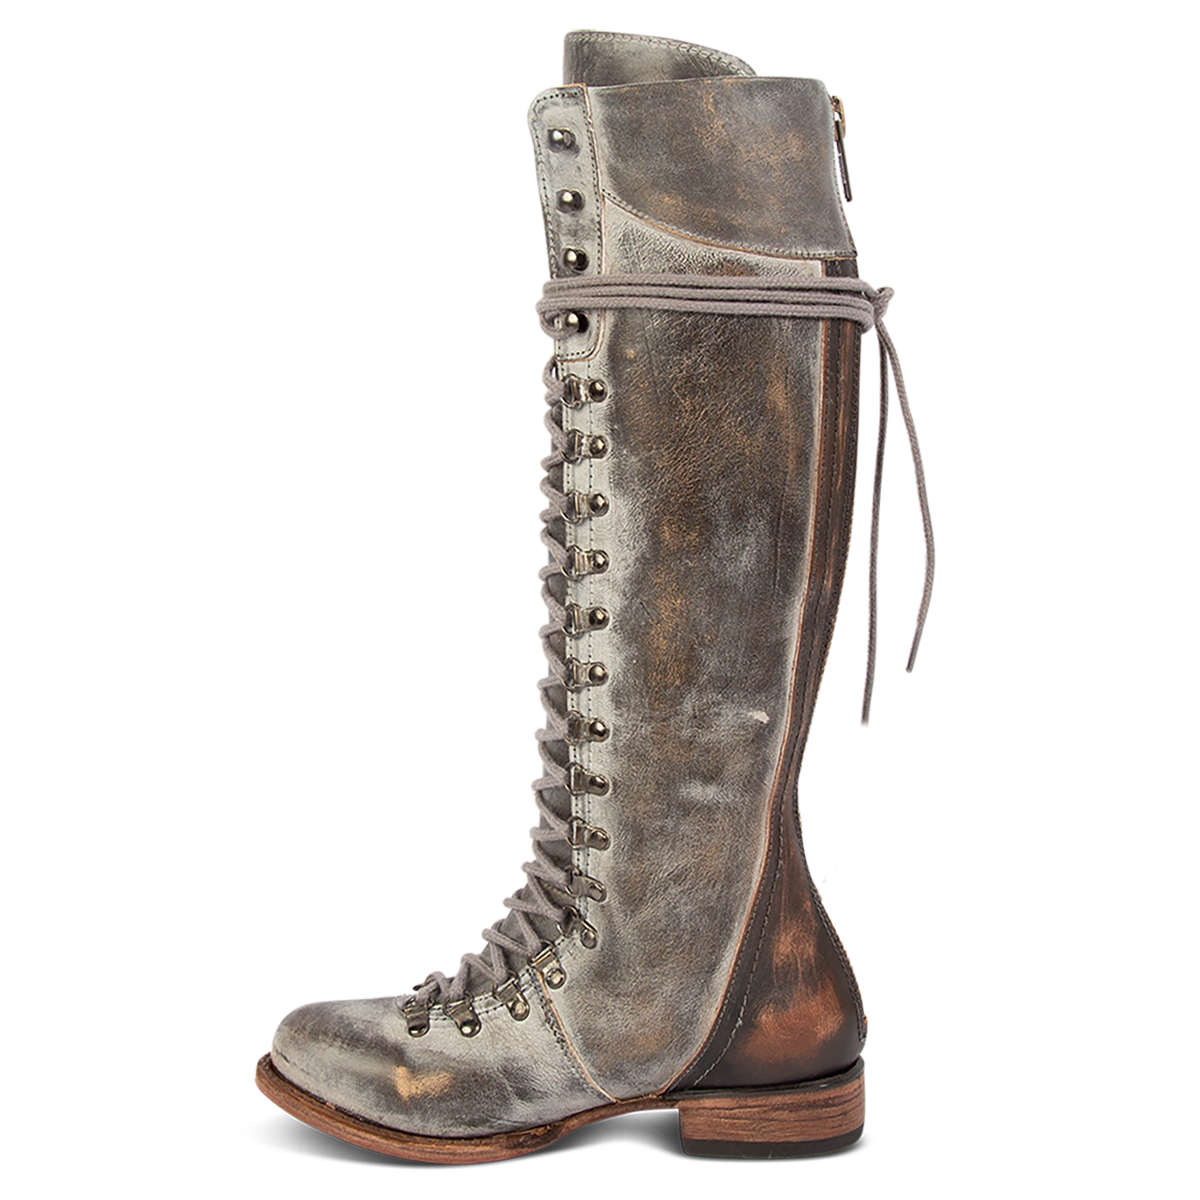 Inside view showing lace up front and two toned full-grain leather detailing on FREEBIRD women's Raphael ice boot